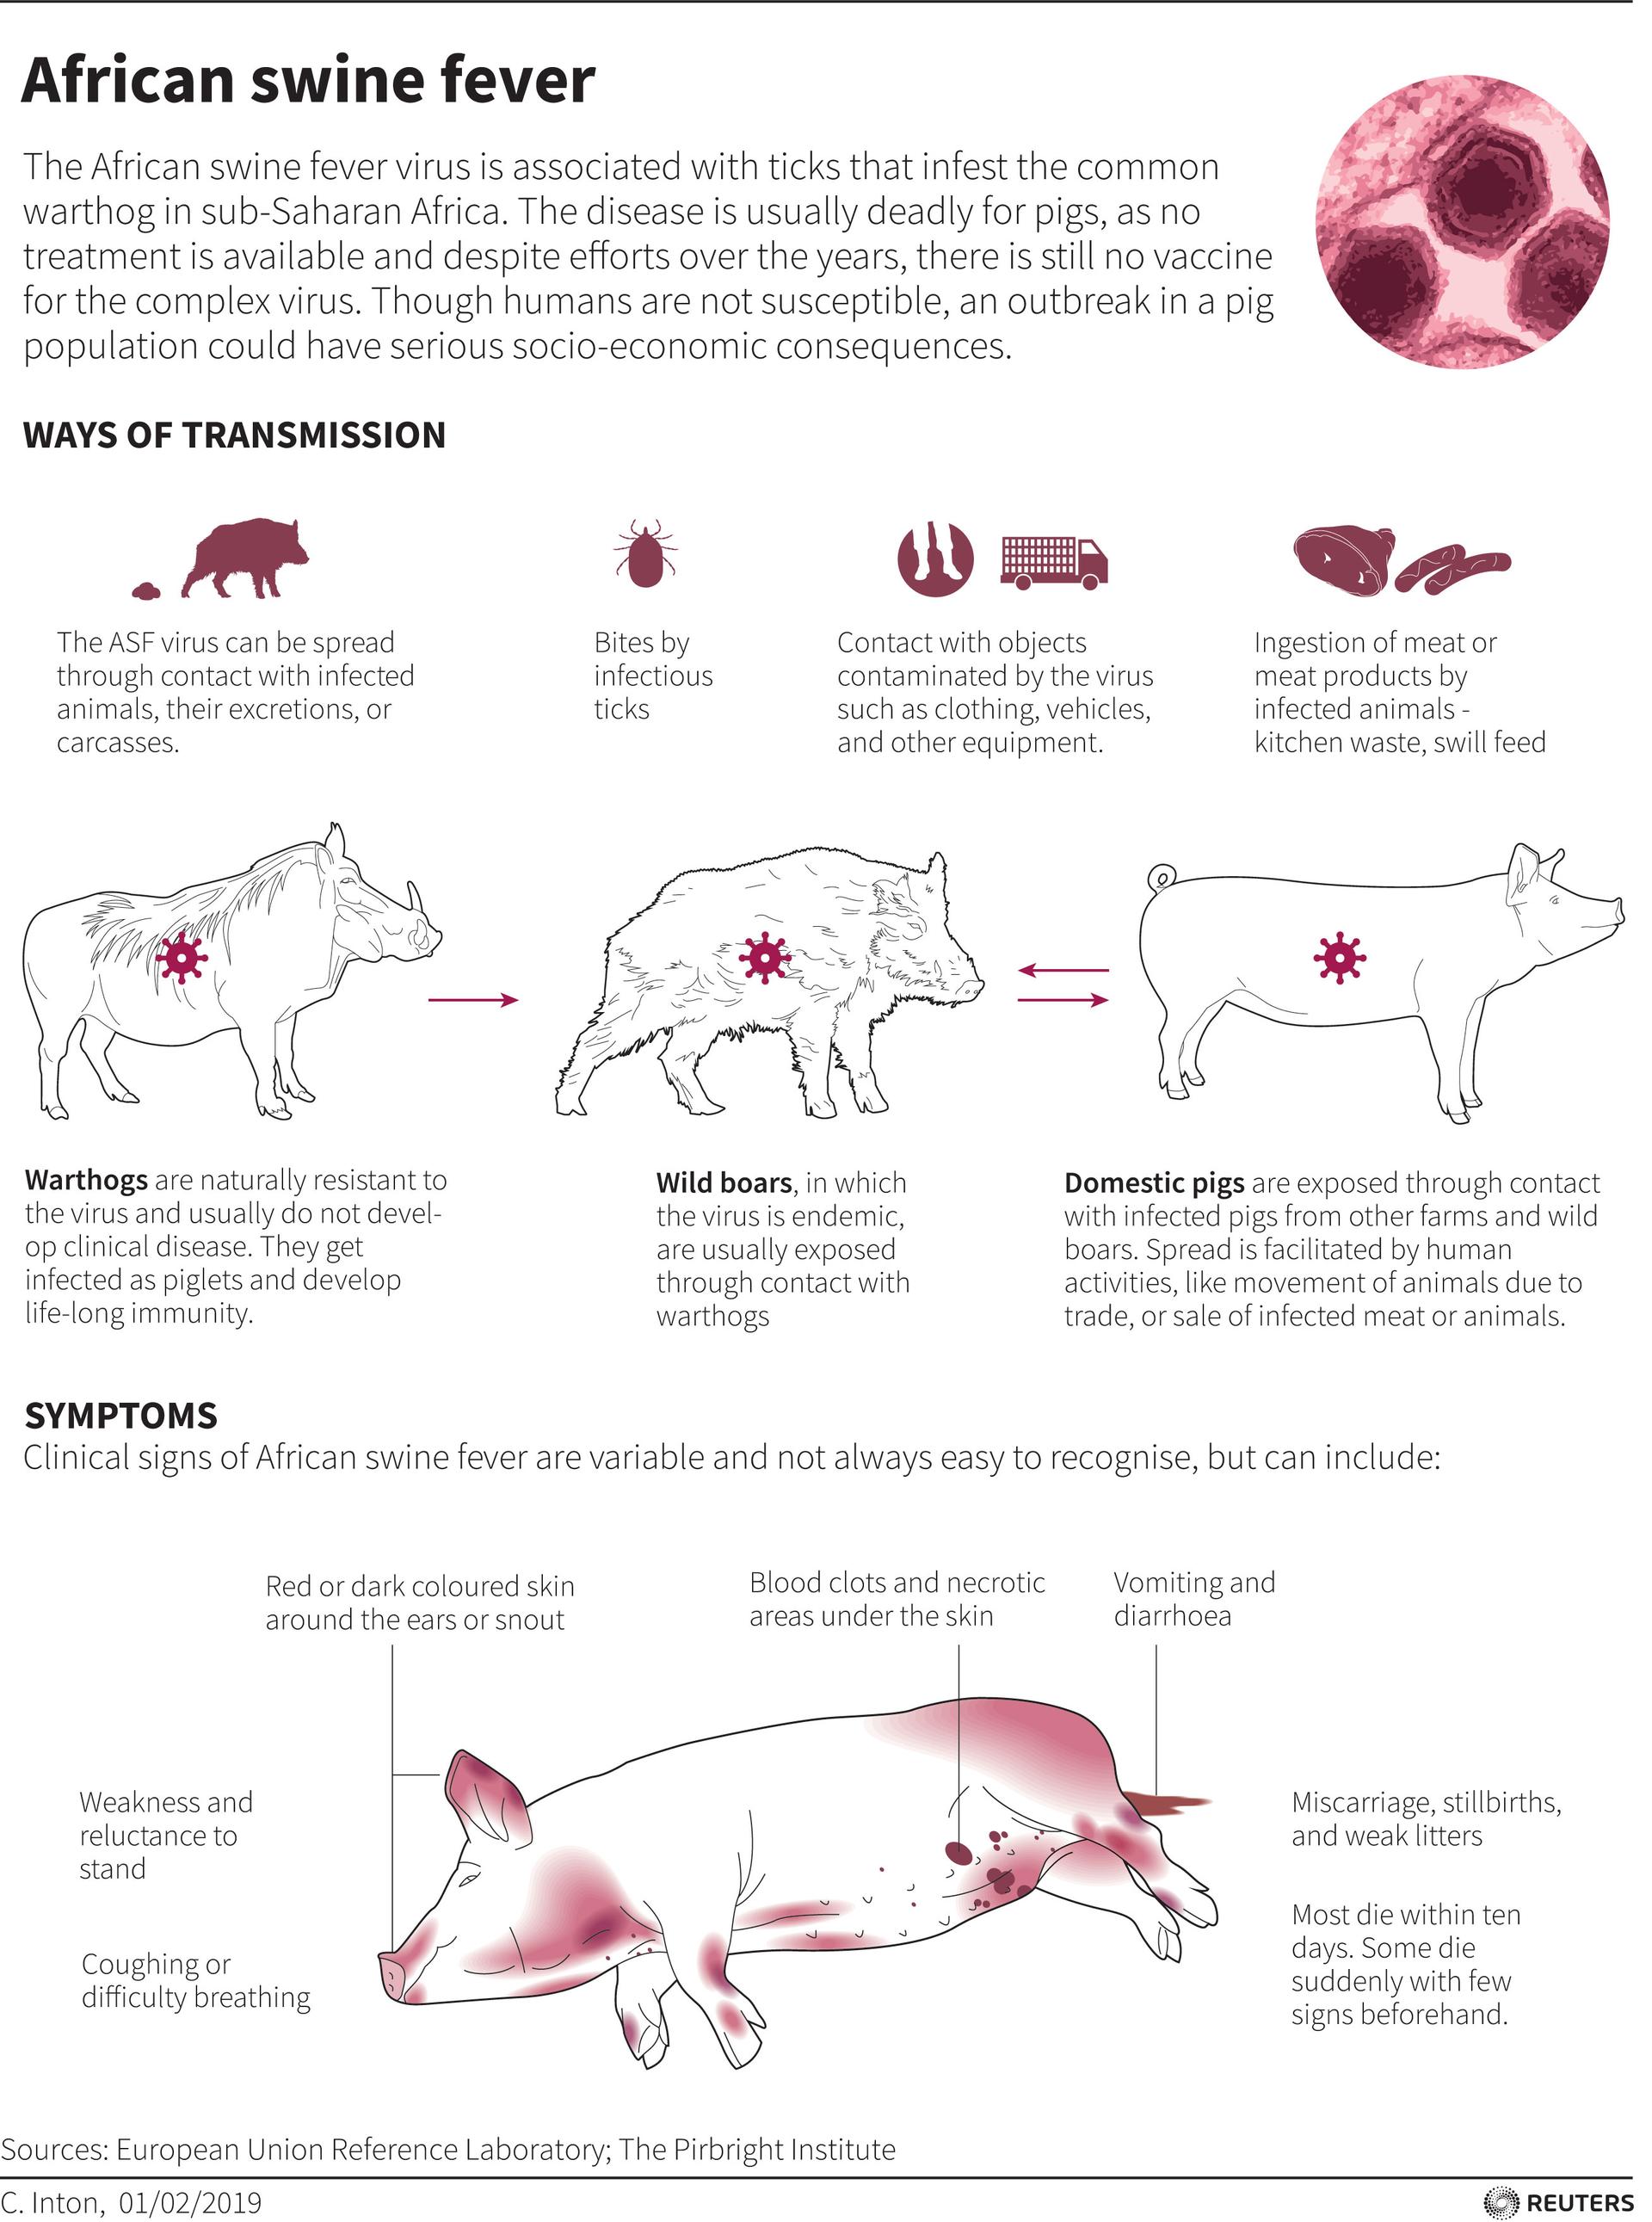 A graphic shows how African swine flu is transmitted